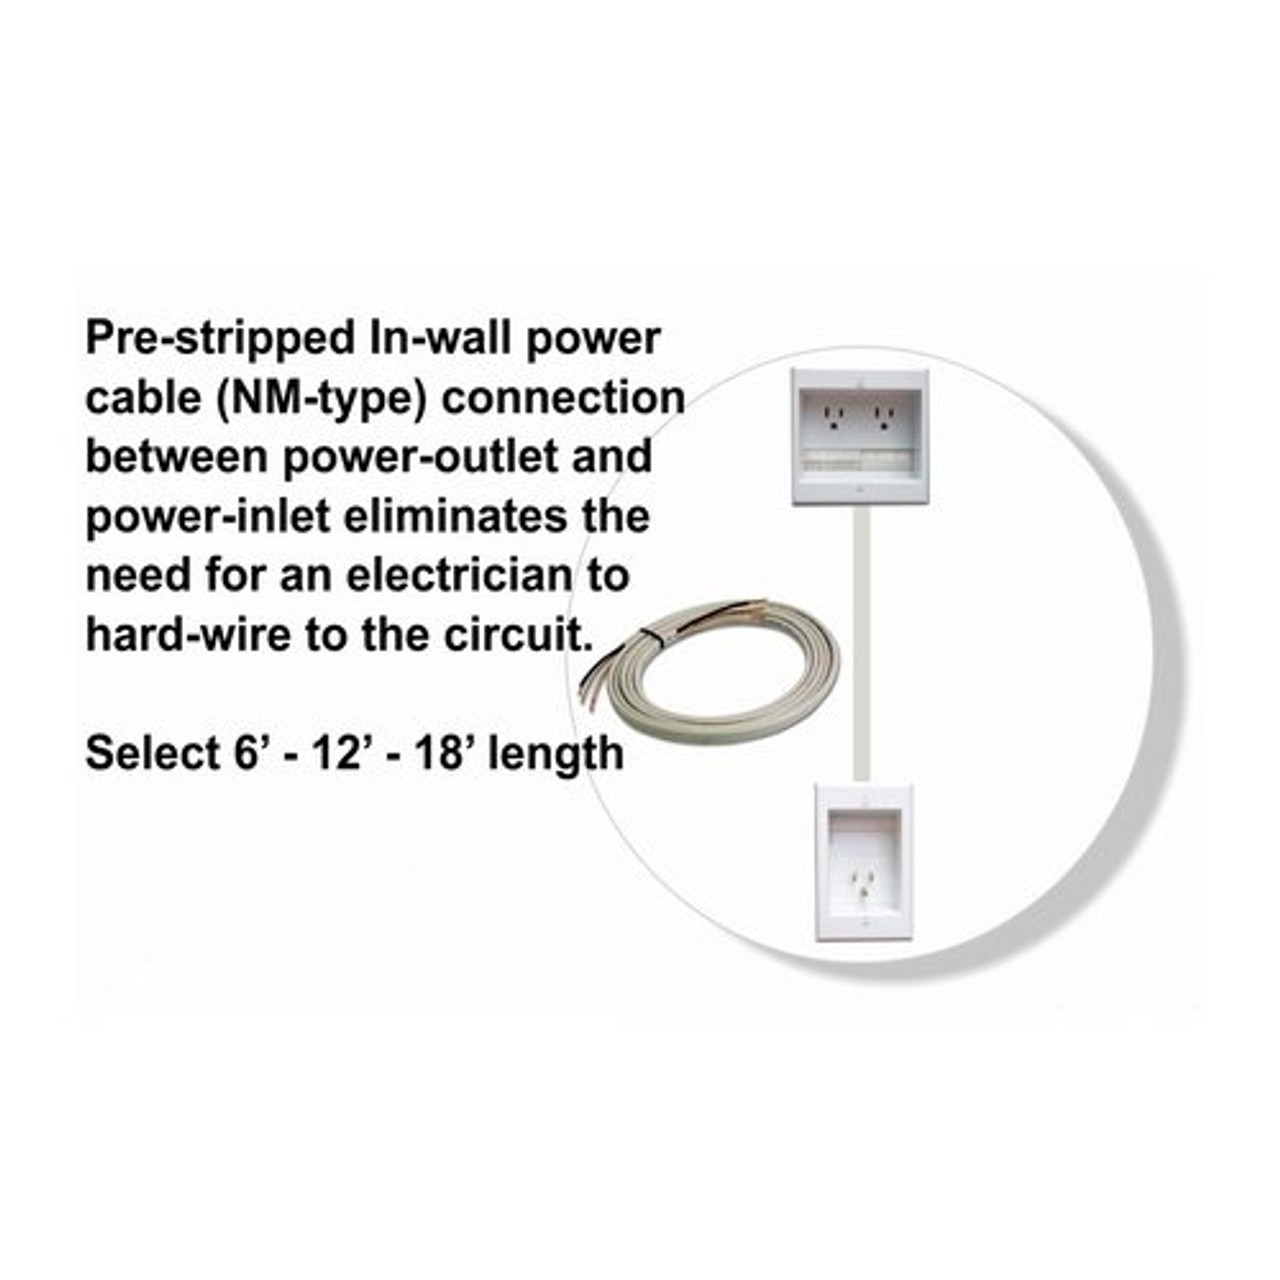 PowerBridge In-Wall Power Connection Kit with Single Power and Cable Management for Wall Mounted HDTV, White